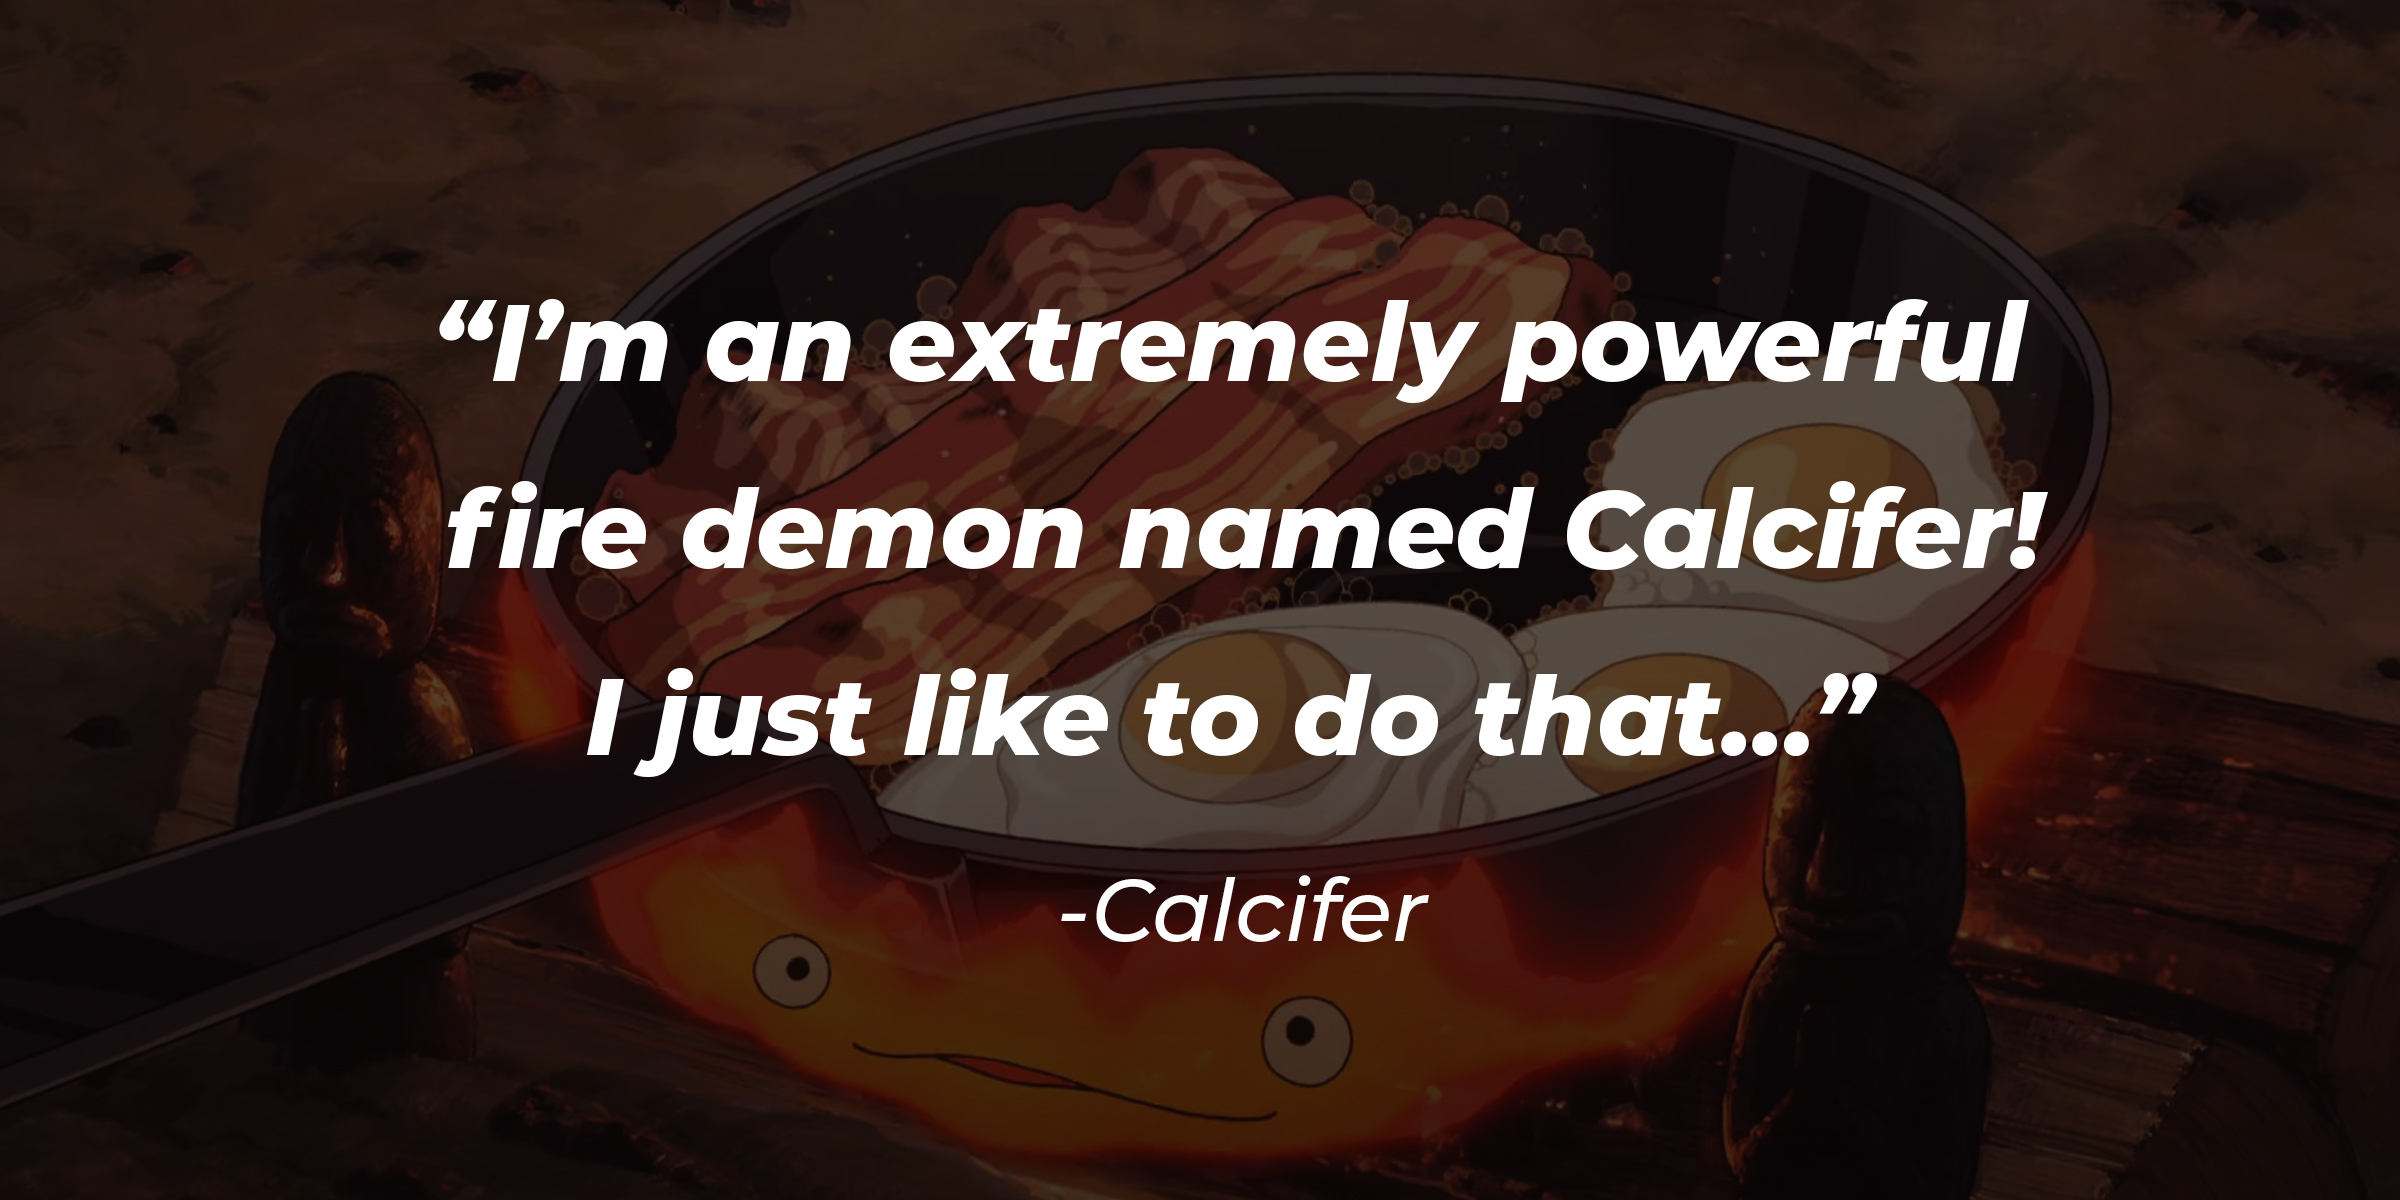 A picture of Calcifer underneath a pan where breakfast is being made along with Calcifer’s quote: “I’m an extremely powerful fire demon named Calcifer! I just like to do that…” | Source: facebook.com/GhibliUSA